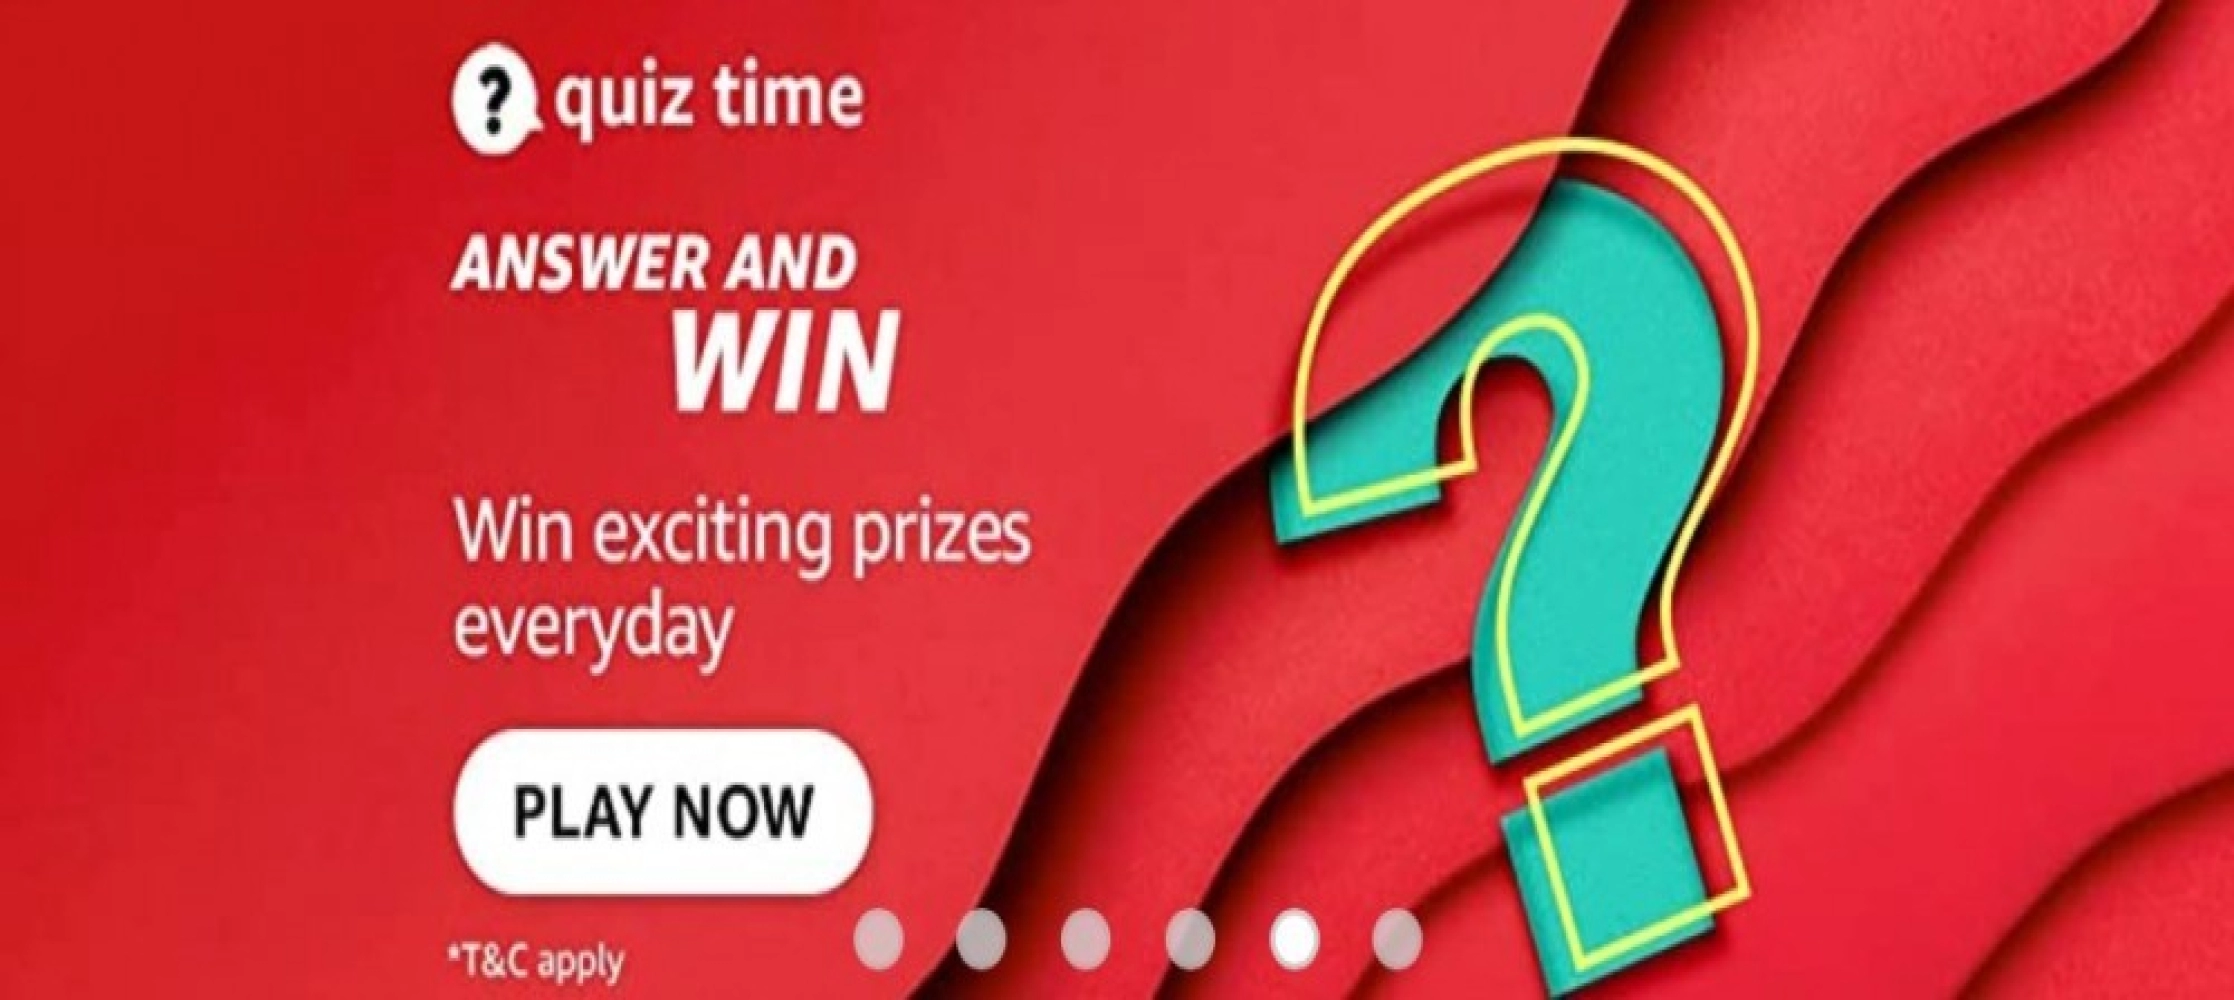 AMAZON QUIZ CONTEST: 22 MAY, 2022 - ANSWER TODAY FOR THE QUESTIONS AND GET A CHANCE TO WIN AMAZON PAY RS.1,000